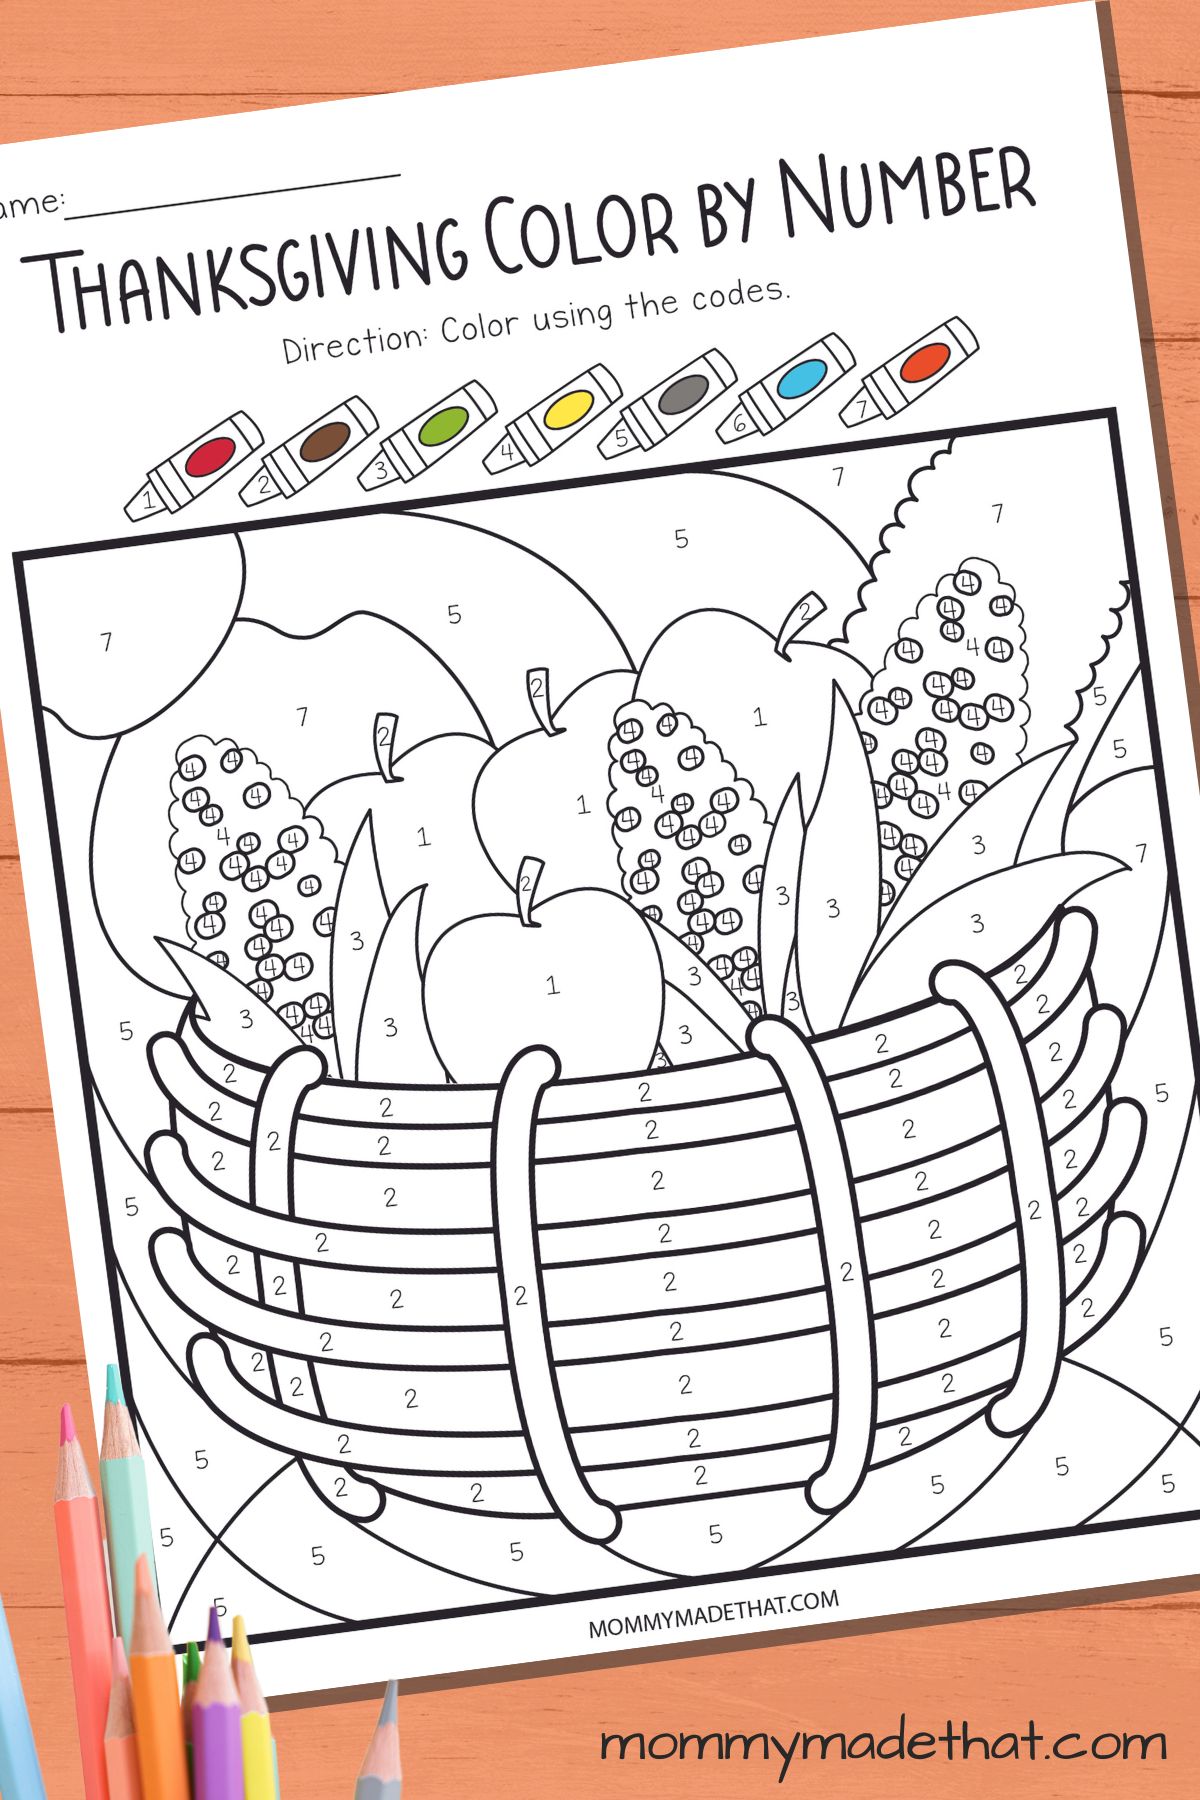 Harvest coloring page